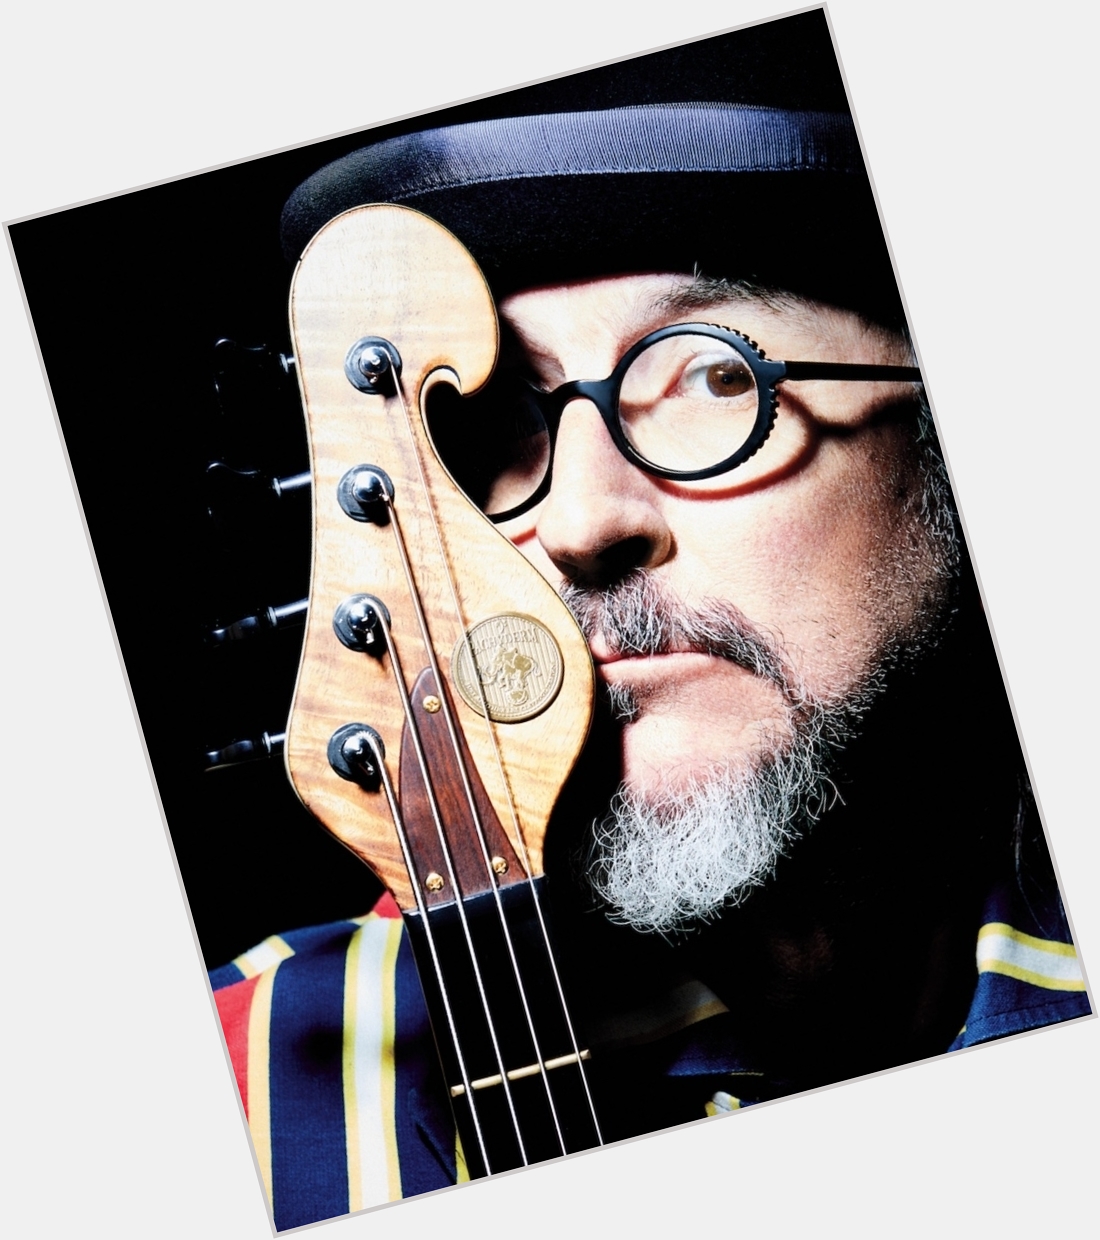  Happy birthday, Les Claypool!

What\s your favorite Primus song? : 